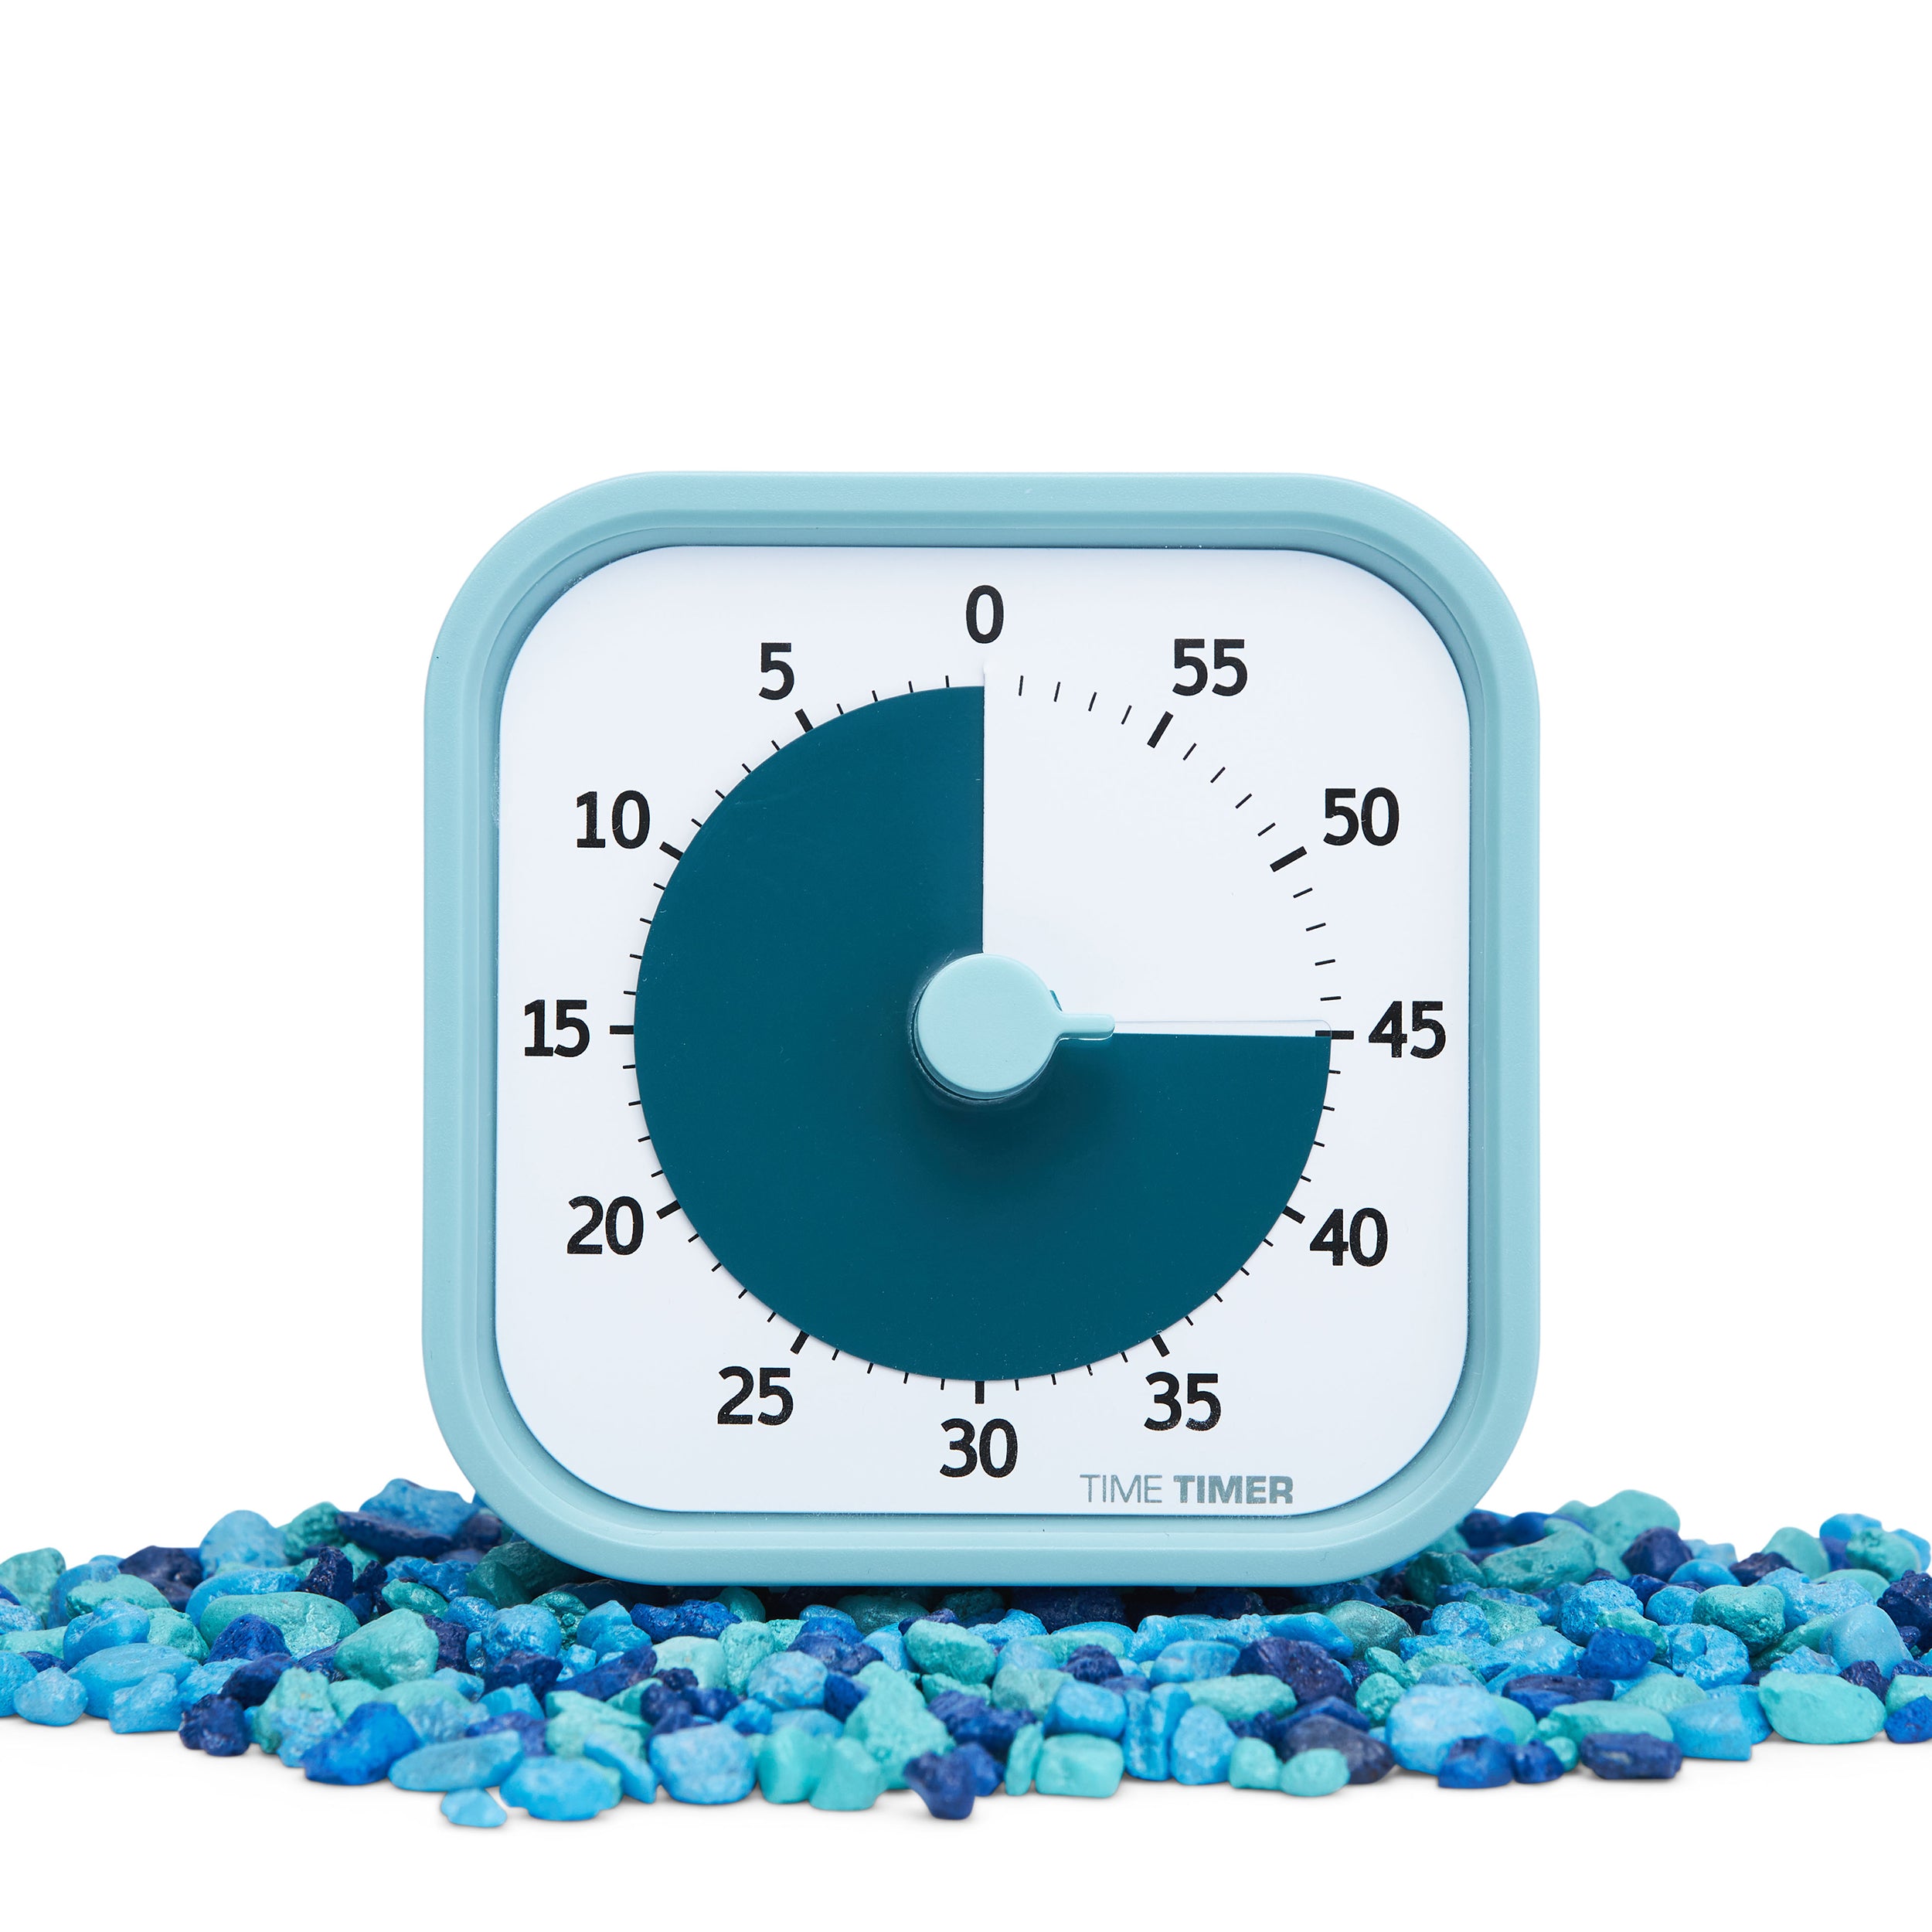 Time Timer MOD - Home Edition - this visual timer is part of the new Home Edition Collection of limited edition colors of the Time Timer MOD visual timers. Pictured is the Lake Day Blue timer. Exterior is a light calming blue, while the colored disk is a darker teal-blue color. Pictured atop aquarium rocks to bring out the blue colors and calming nature. .